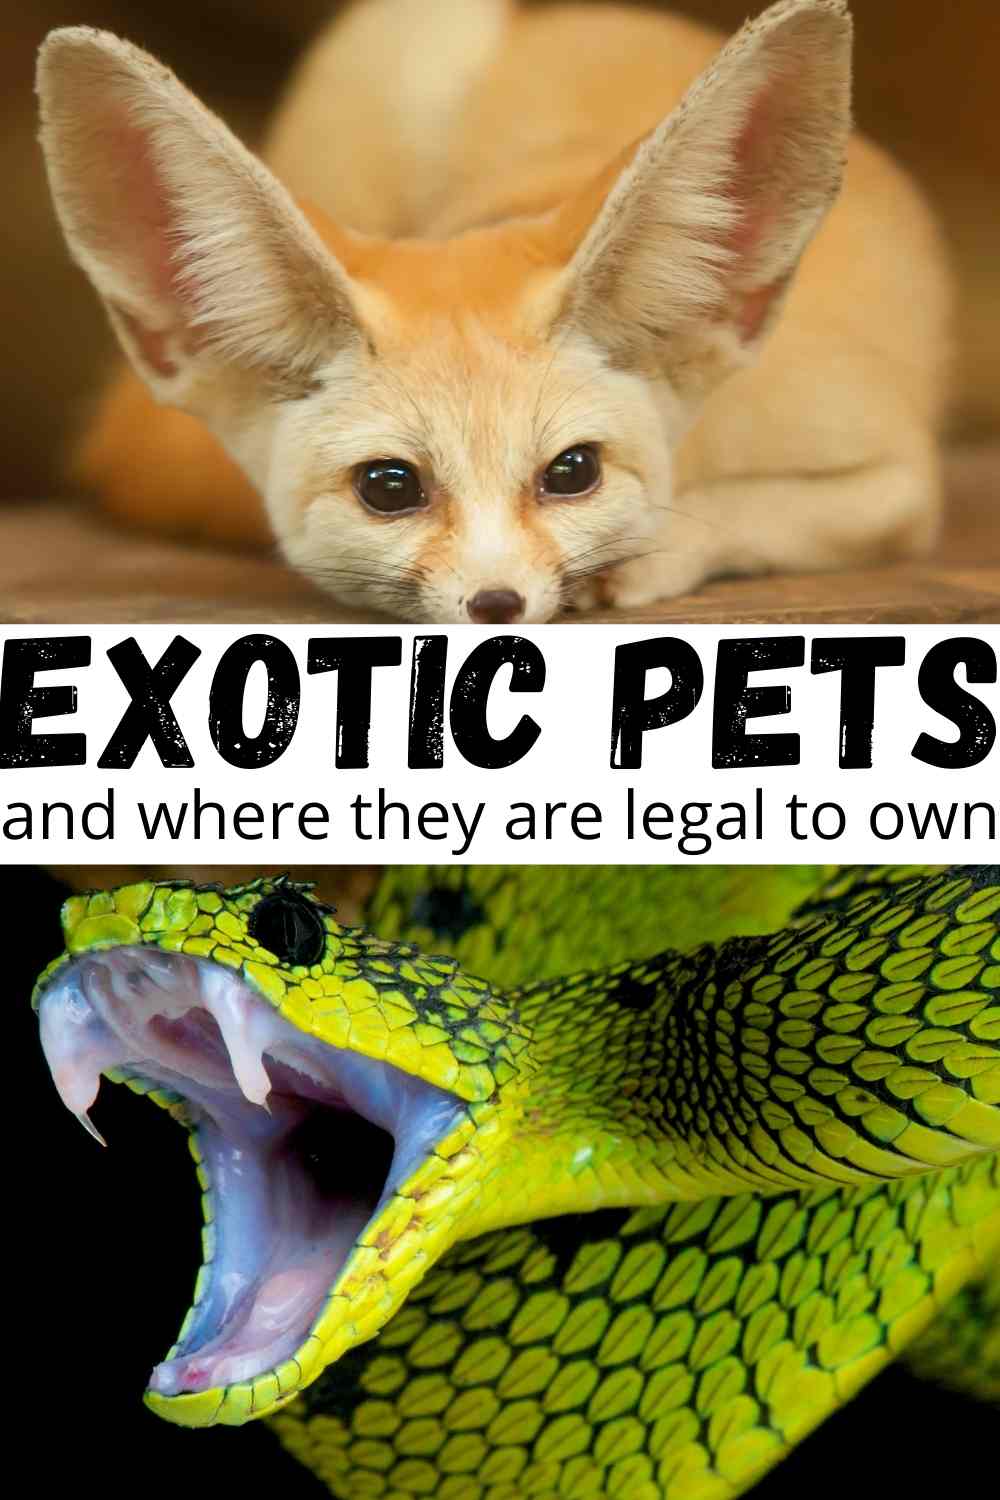 Exotic Pets and where they are legal to own